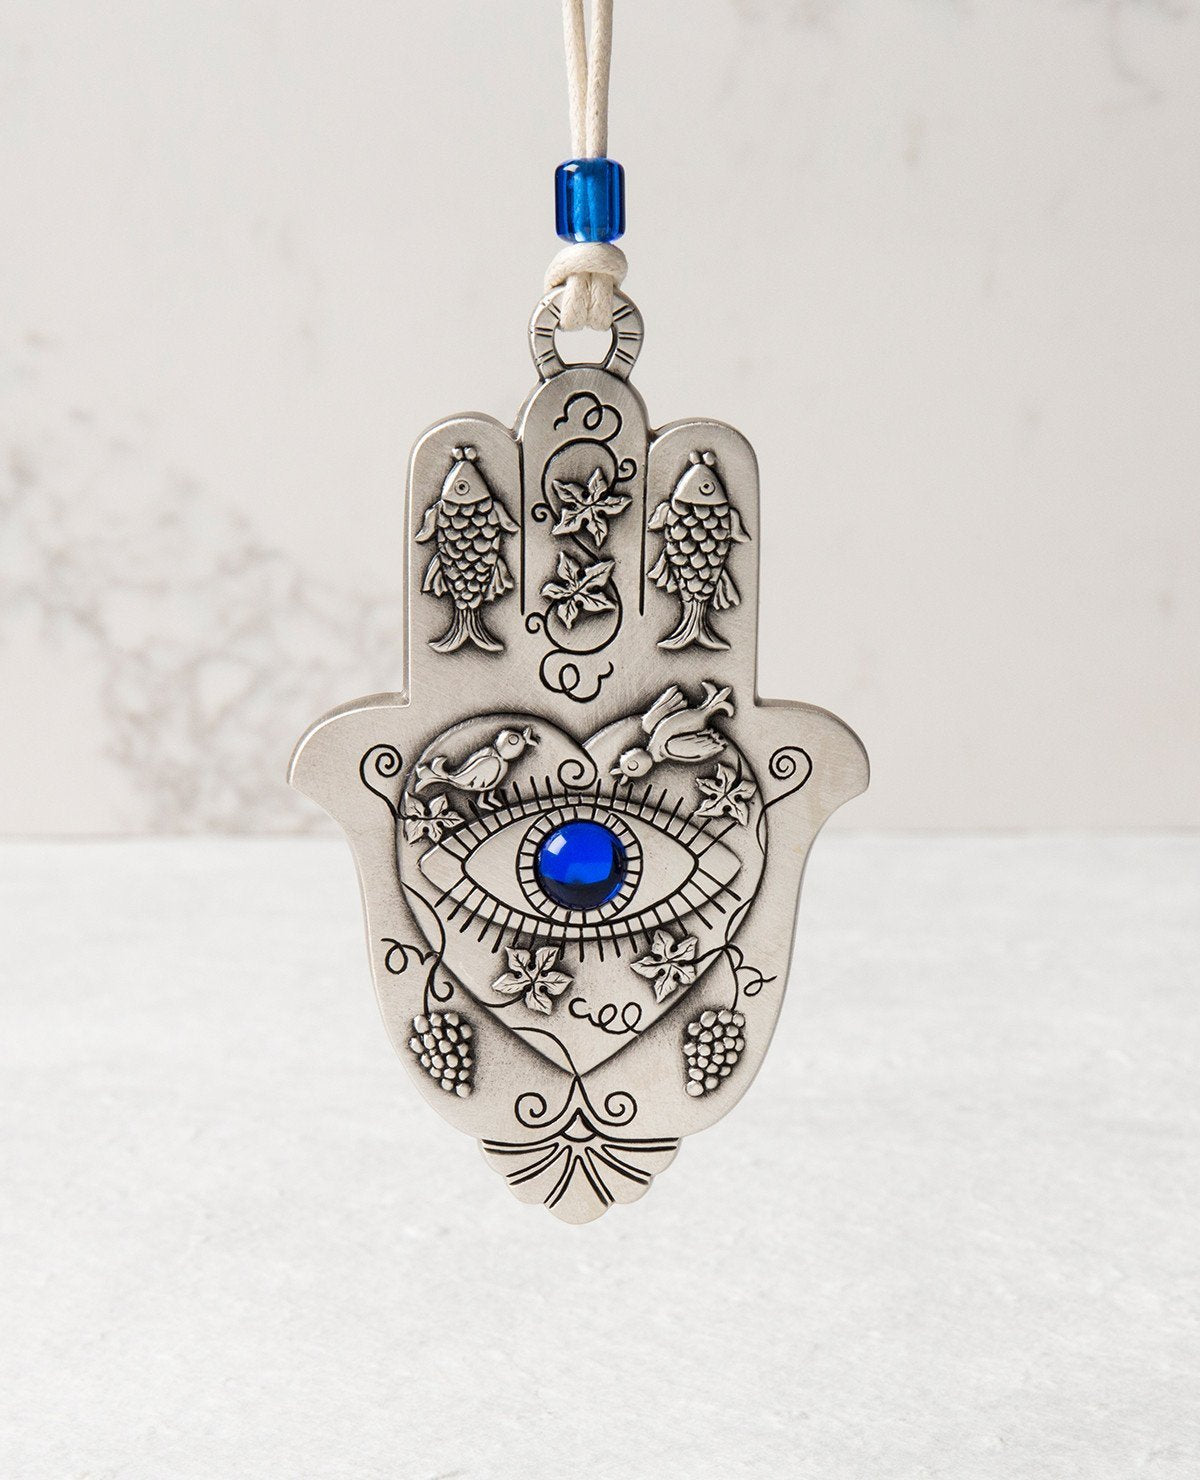 A hanging Hamsa ornament packed with goodness! The Hamsa is coated in sterling sivler and comes with a natural colored faux leather string for hanging, decorated by a blue bead. At the center of the Hamsa is a big heart with an embossed eye inside embedded with a blue colored stone (against the "evil eye"). Above the eye are chirping birds (of peace and love). The Hamsa is decorated with embossed fish (for luck), as well as vine leaves and grape clusters (for abundance). What else could we ask for? Just the